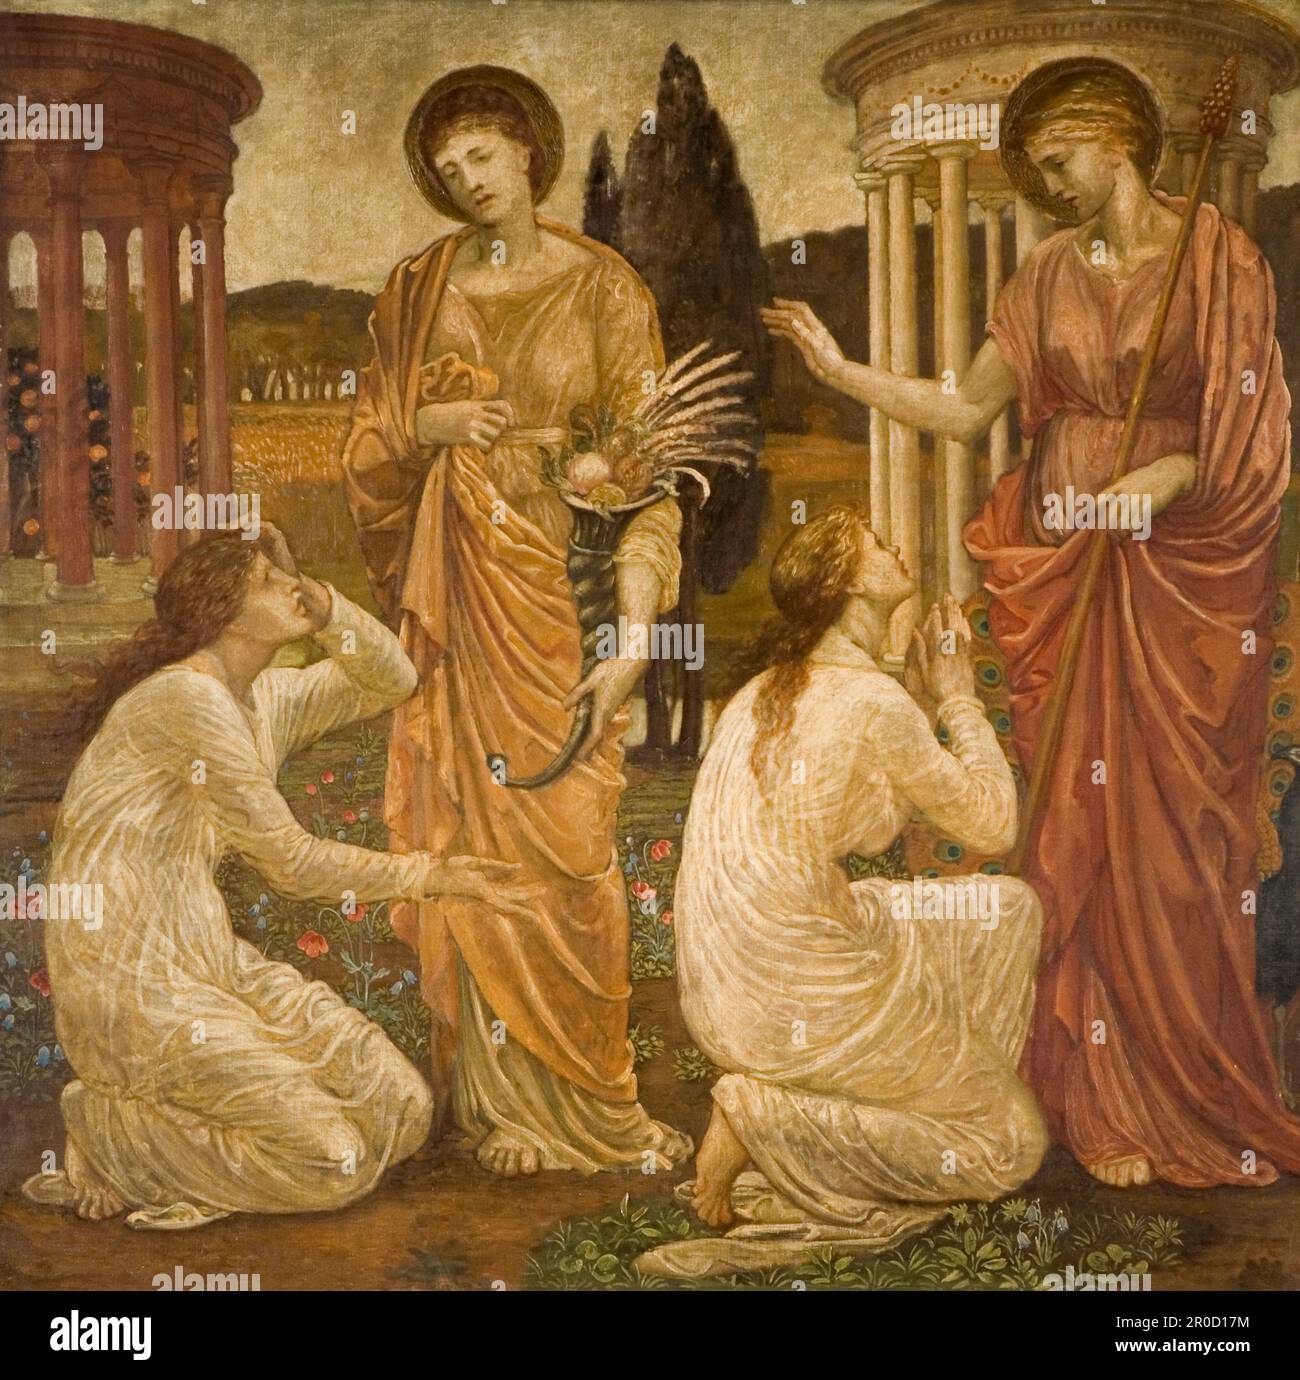 Cupid and Psyche - Palace Green Murals - Psyche at the Shrines of Juno and Ceres, 1881. By Sir Edward Burne-Jones and Walter Crane. A scene from William Morris' 'The Earthly Paradise'. Stock Photo